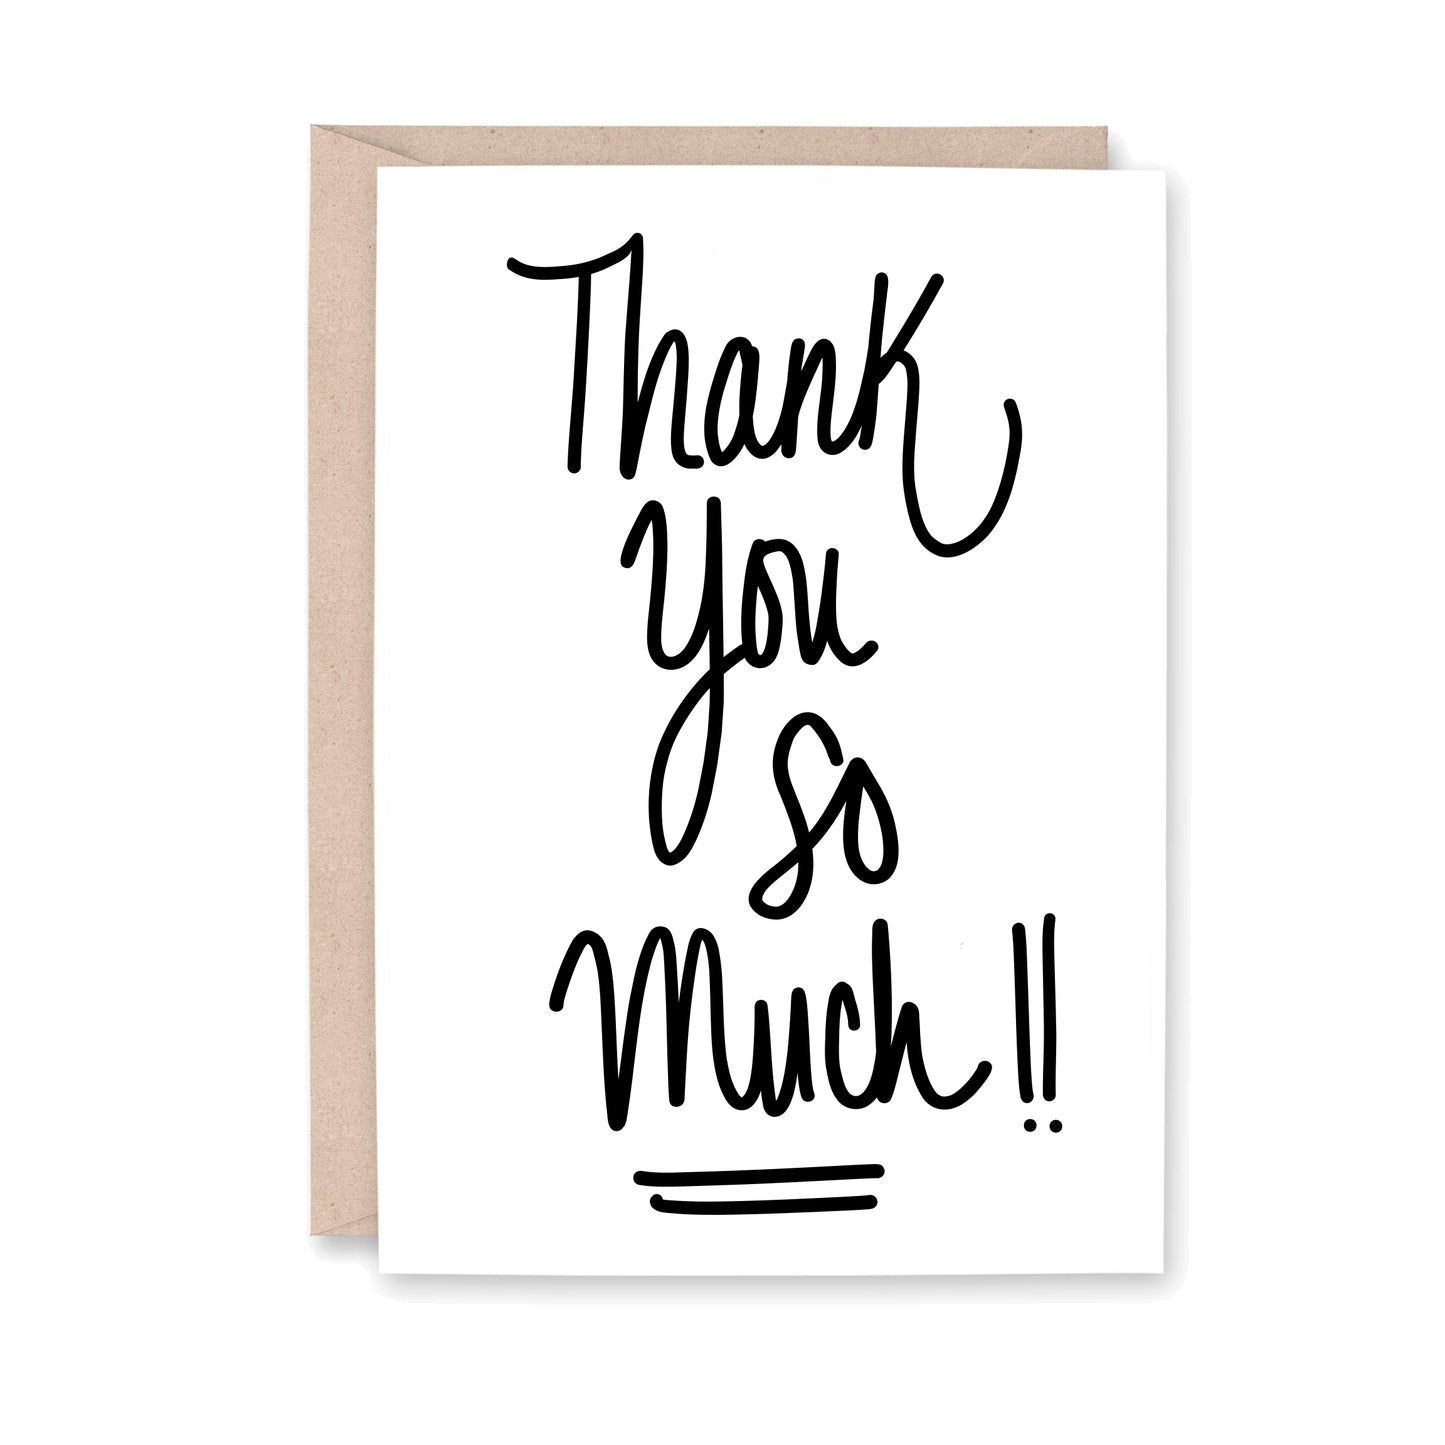 Greeting Card that read "Thank you so much!!" in a modern handwritten calligraphy